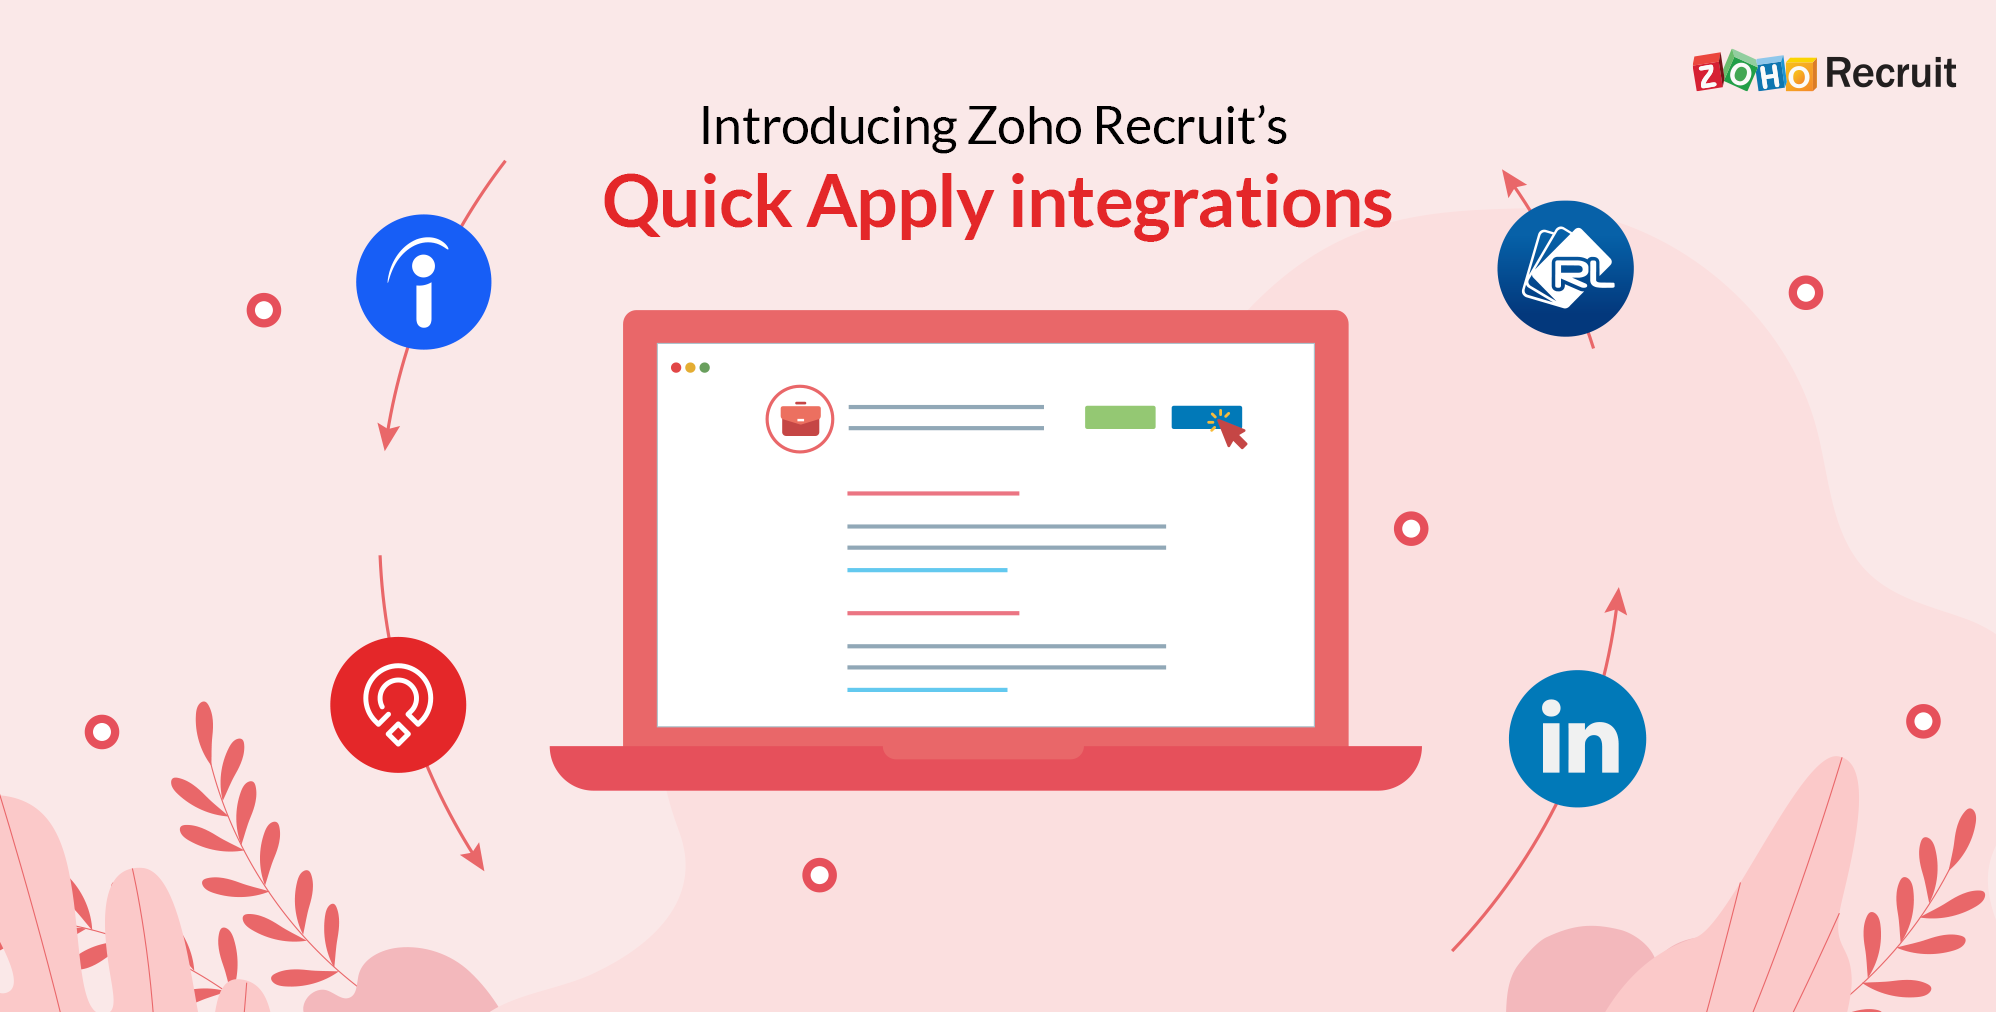 Candidate application experience made simple with Zoho Recruit